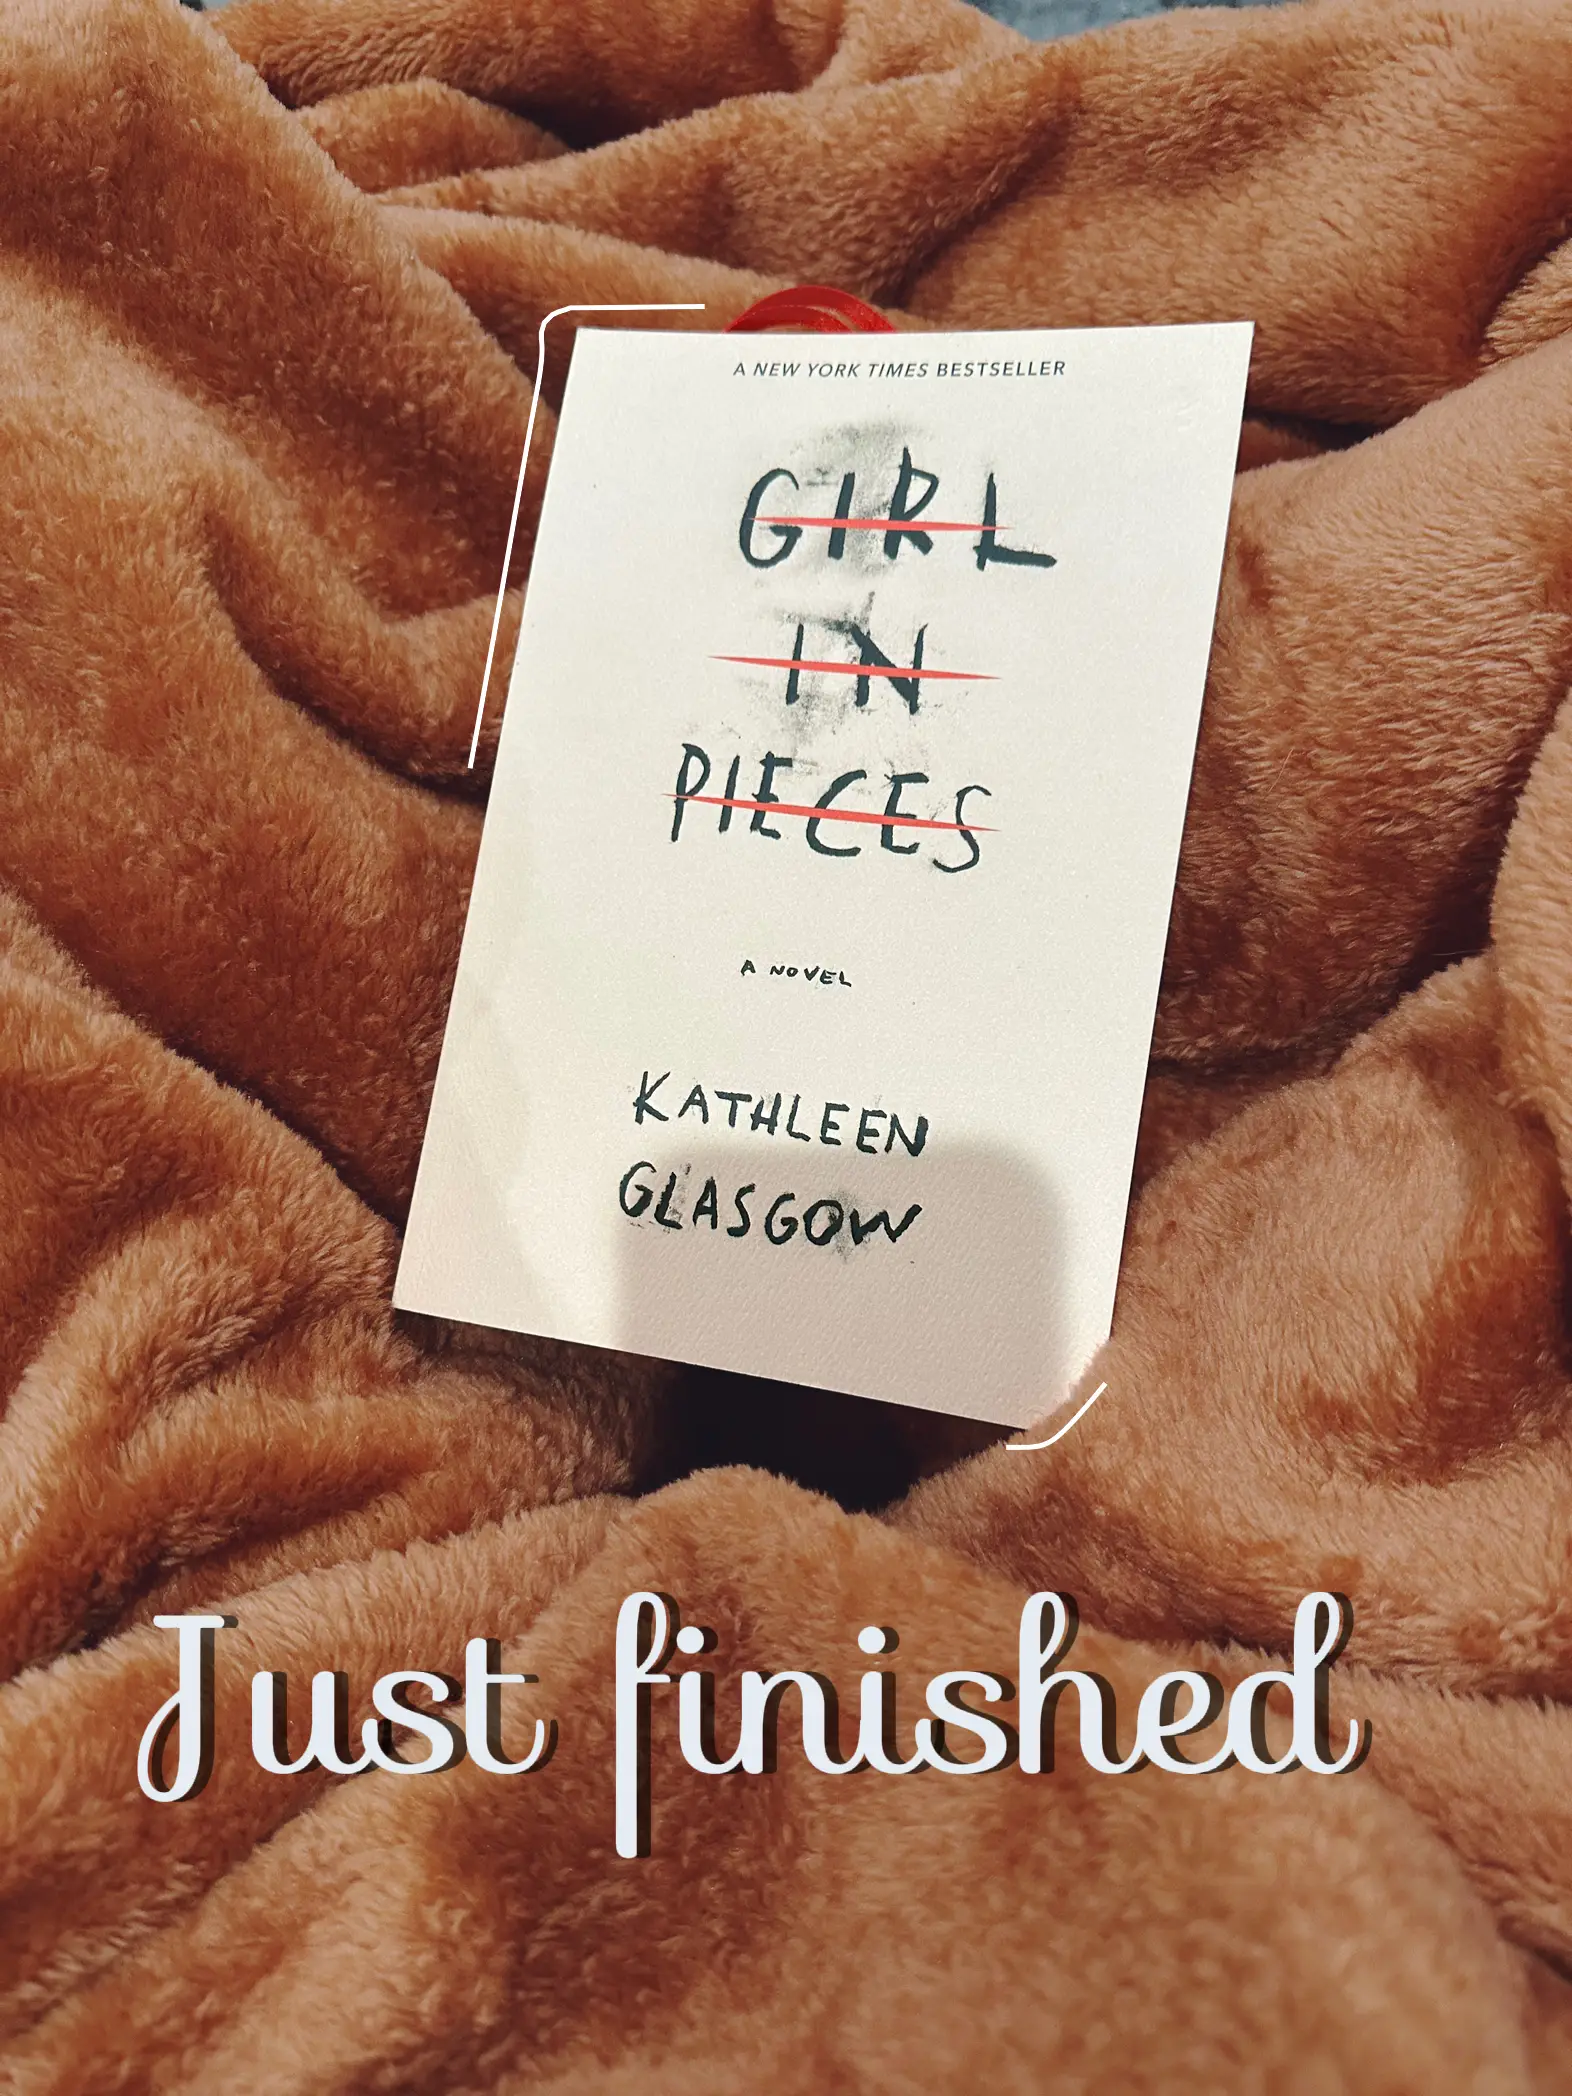 Girl In Pieces : Kathleen Glasgow : Free Download, Borrow, and